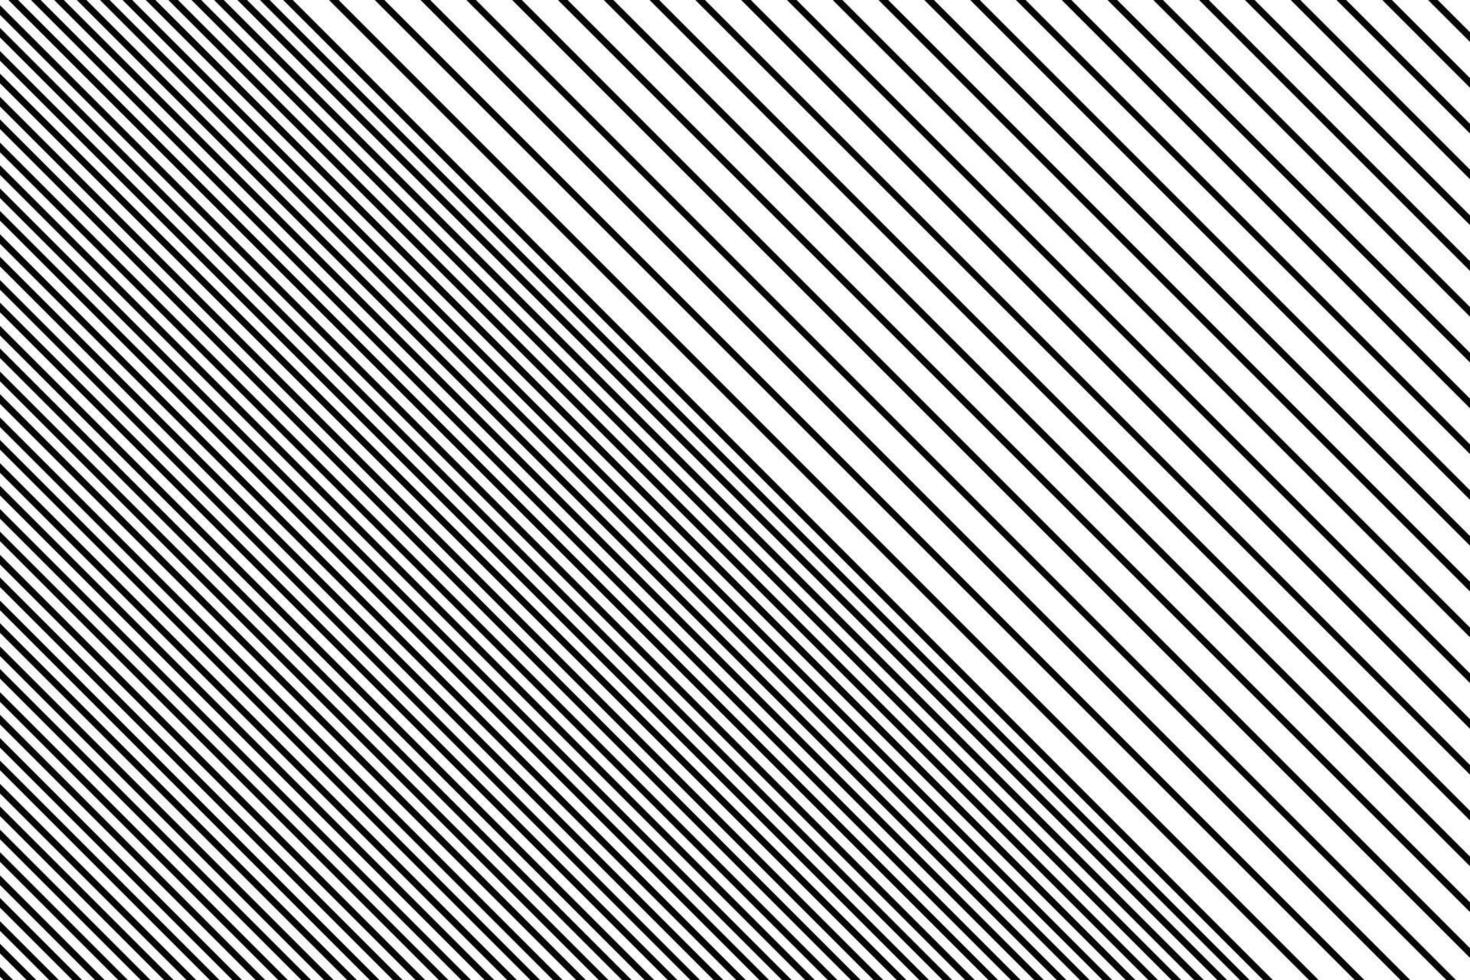 abstract diagonal lines oblique edgy vector pattern.